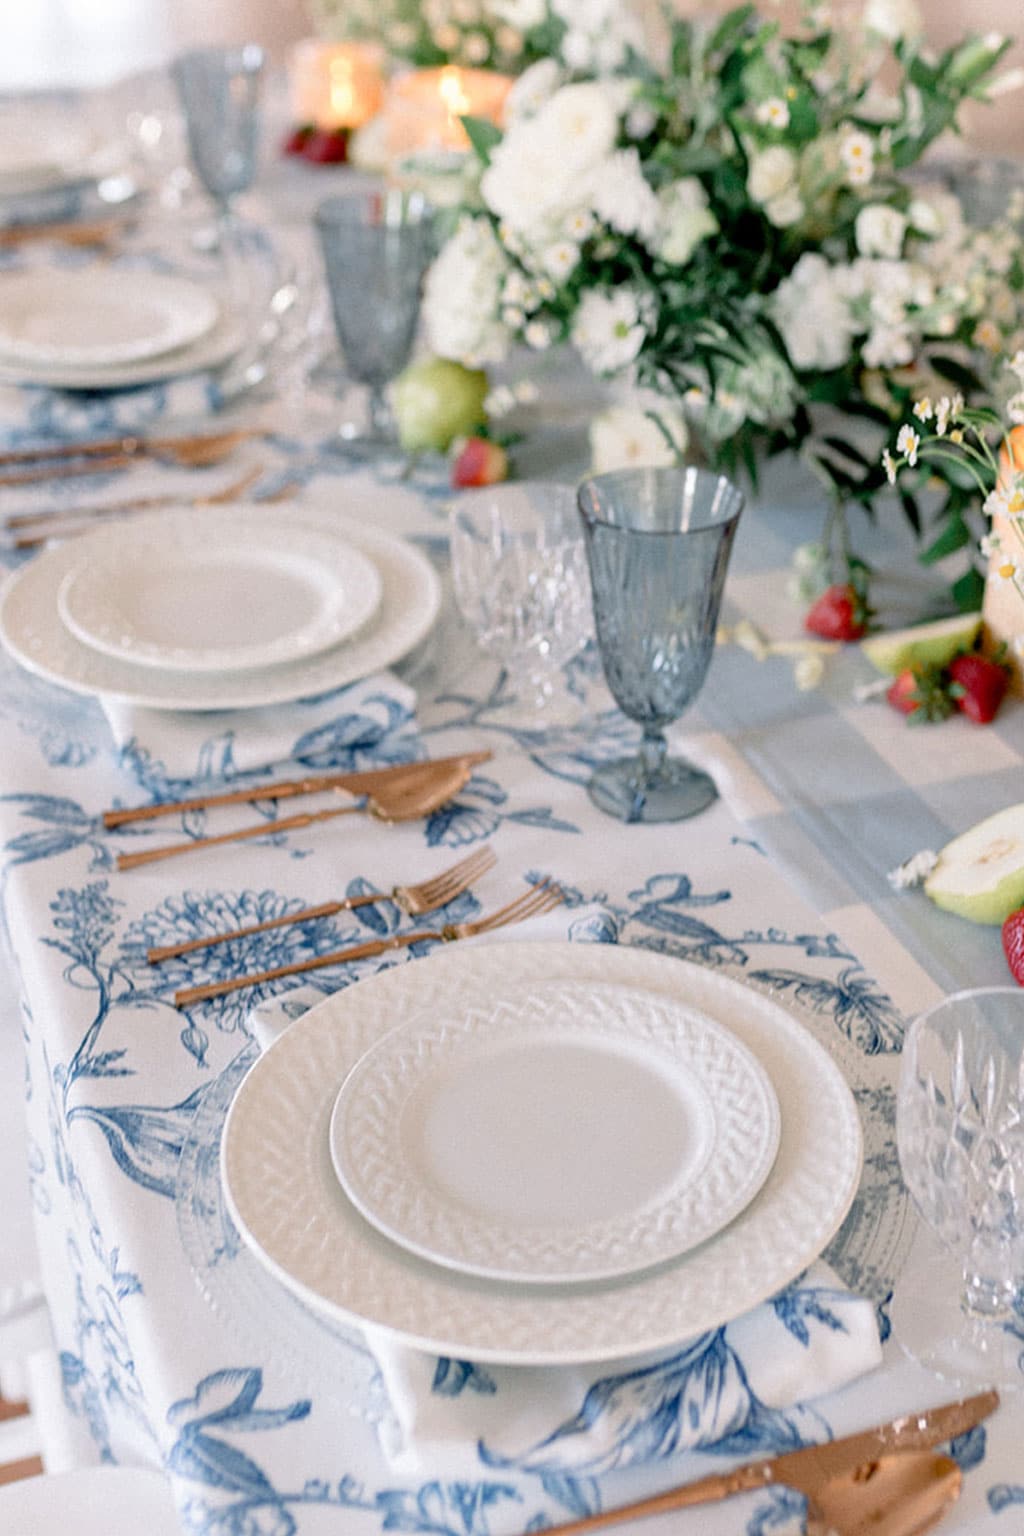 Scalloped Glass Plate Rentals - Atlas Party Rentals